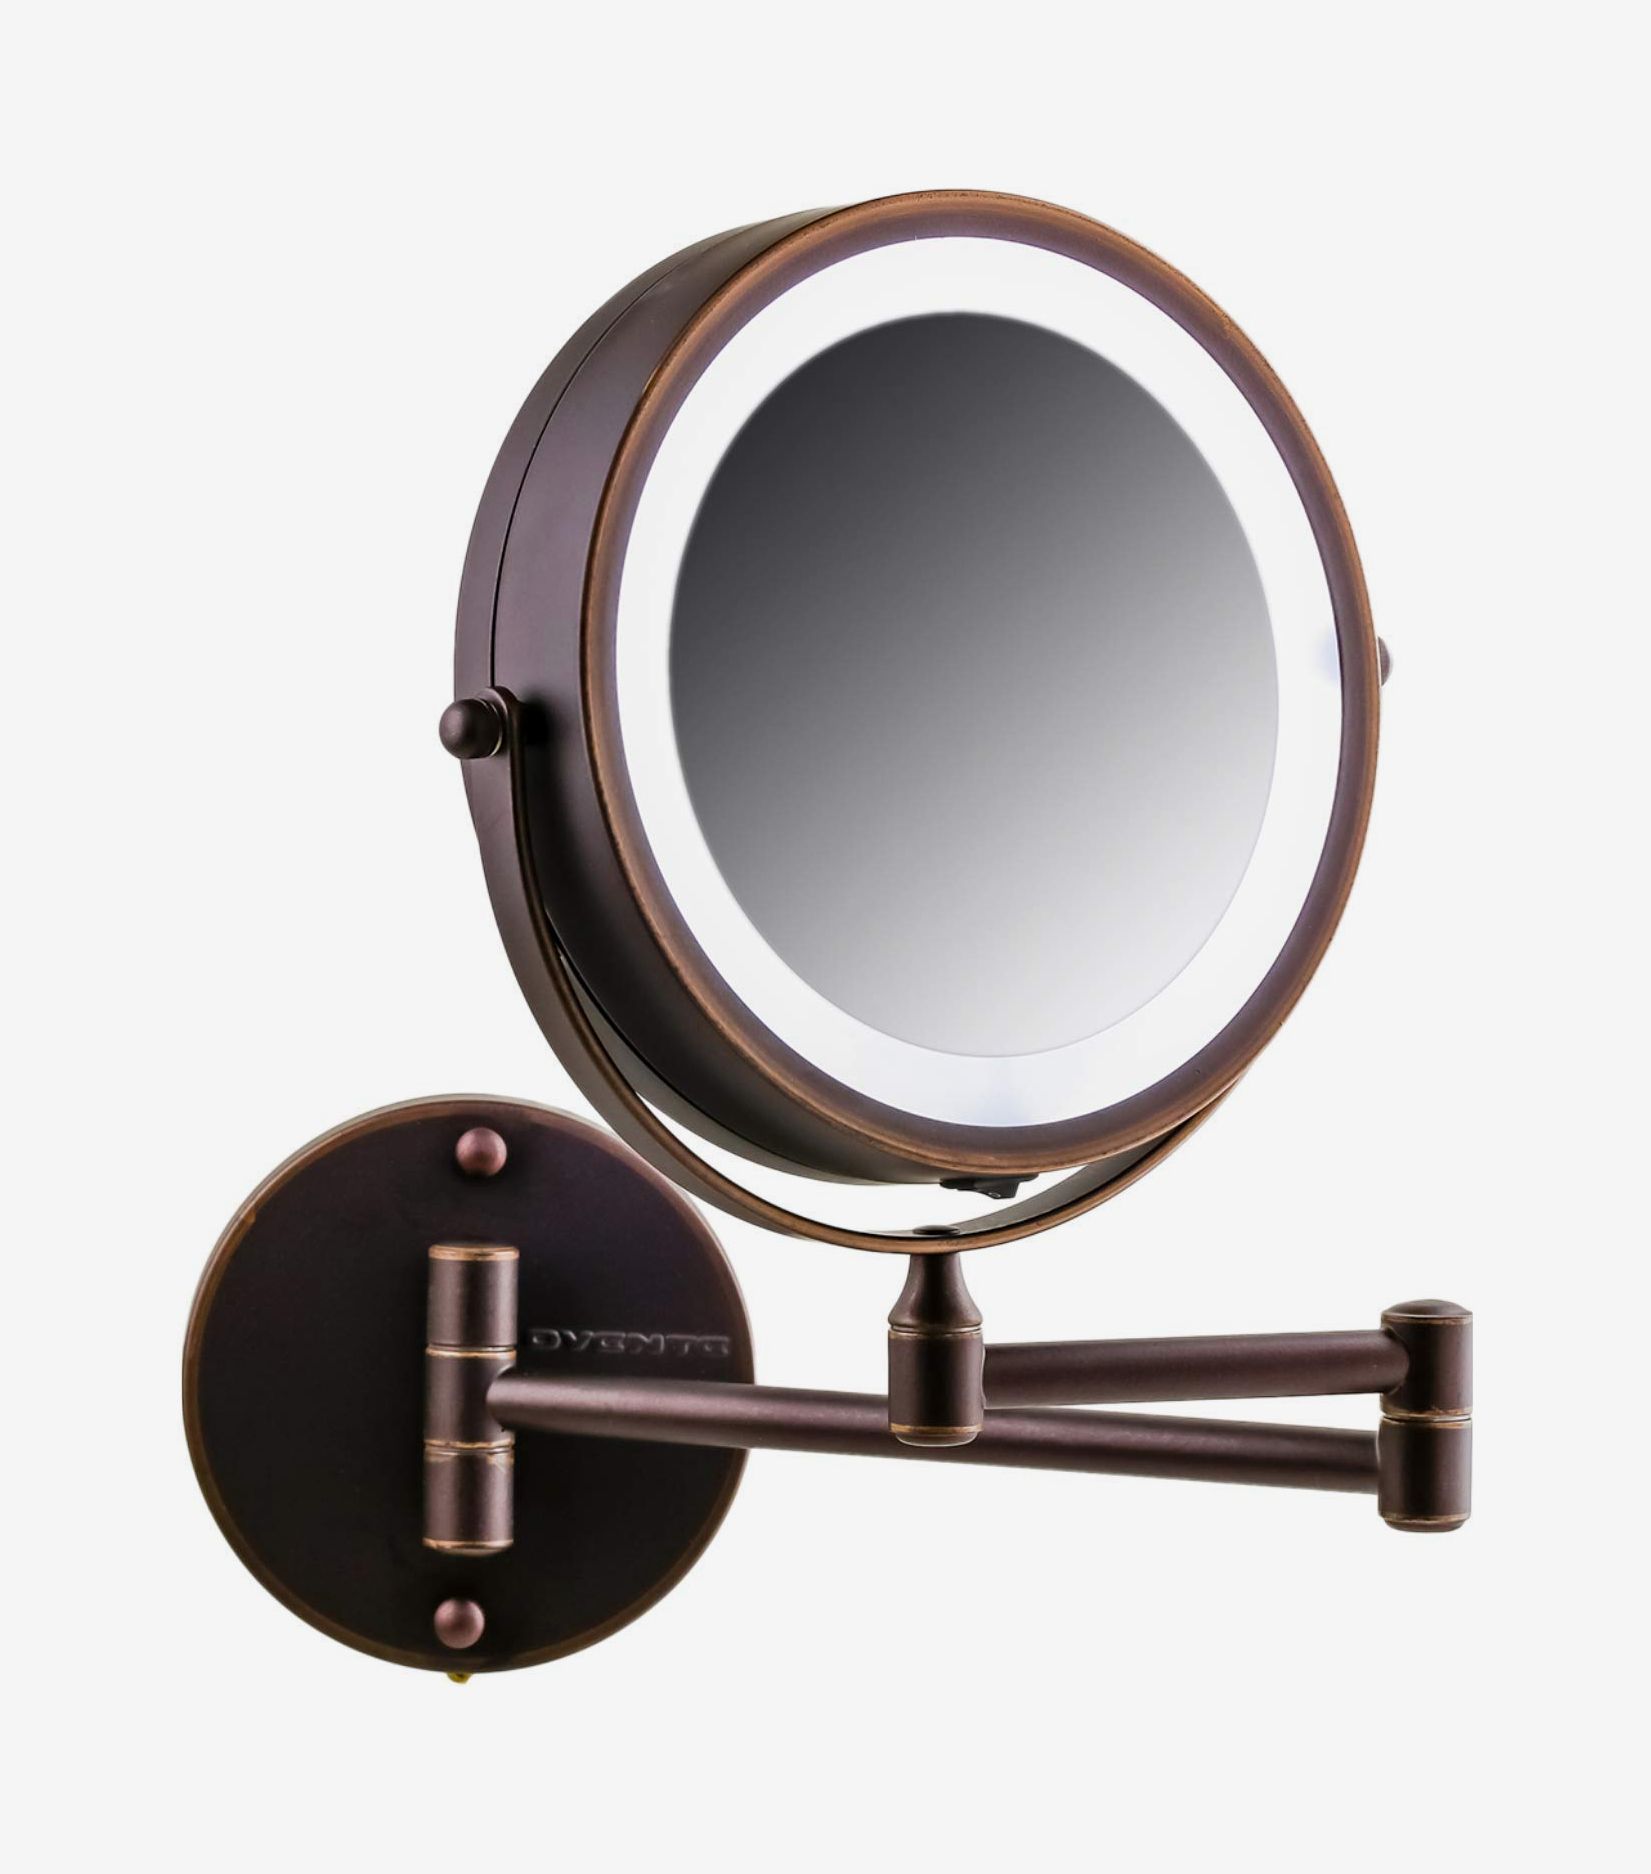 14 Best Lighted Makeup Mirrors 2022, Best Wall Vanity Mirror With Lights